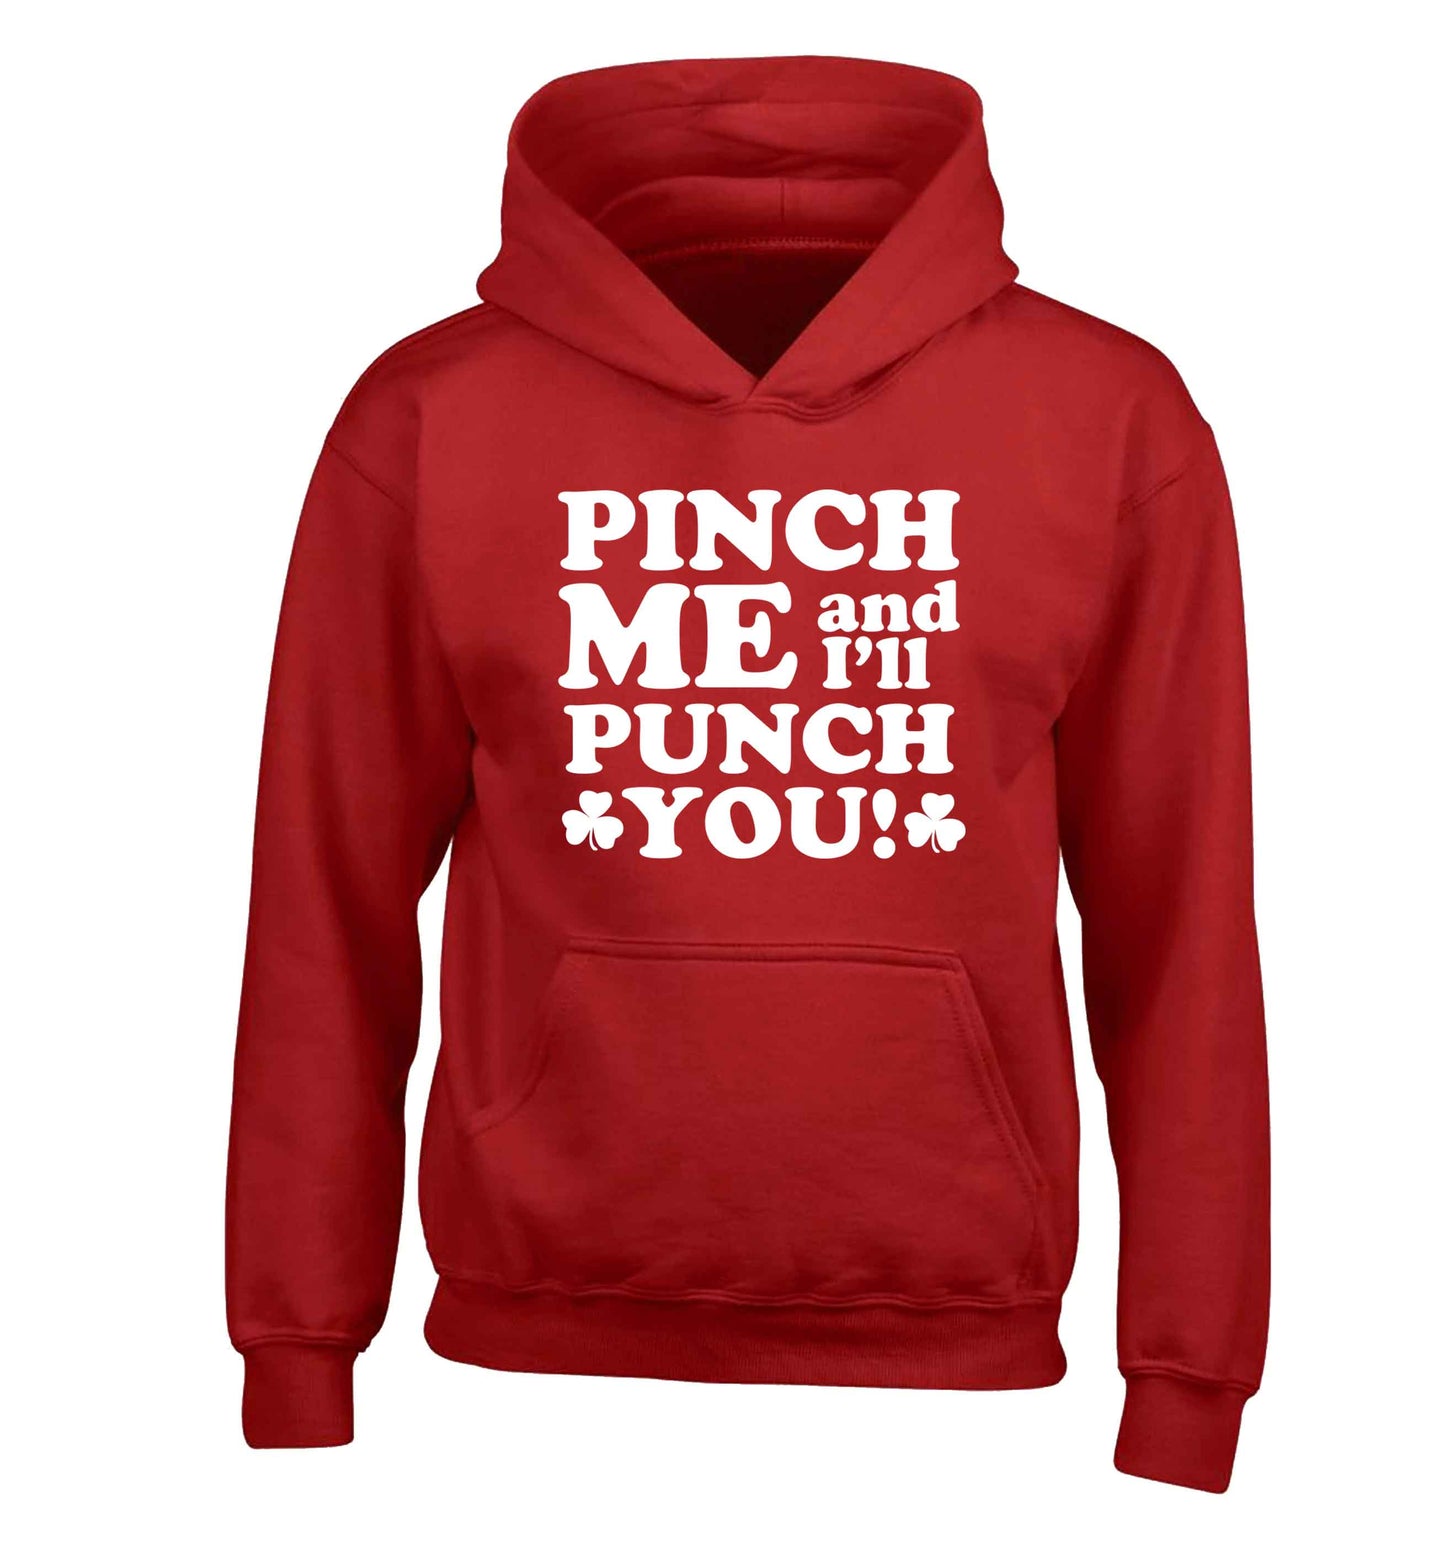 Pinch me and I'll punch you children's red hoodie 12-13 Years